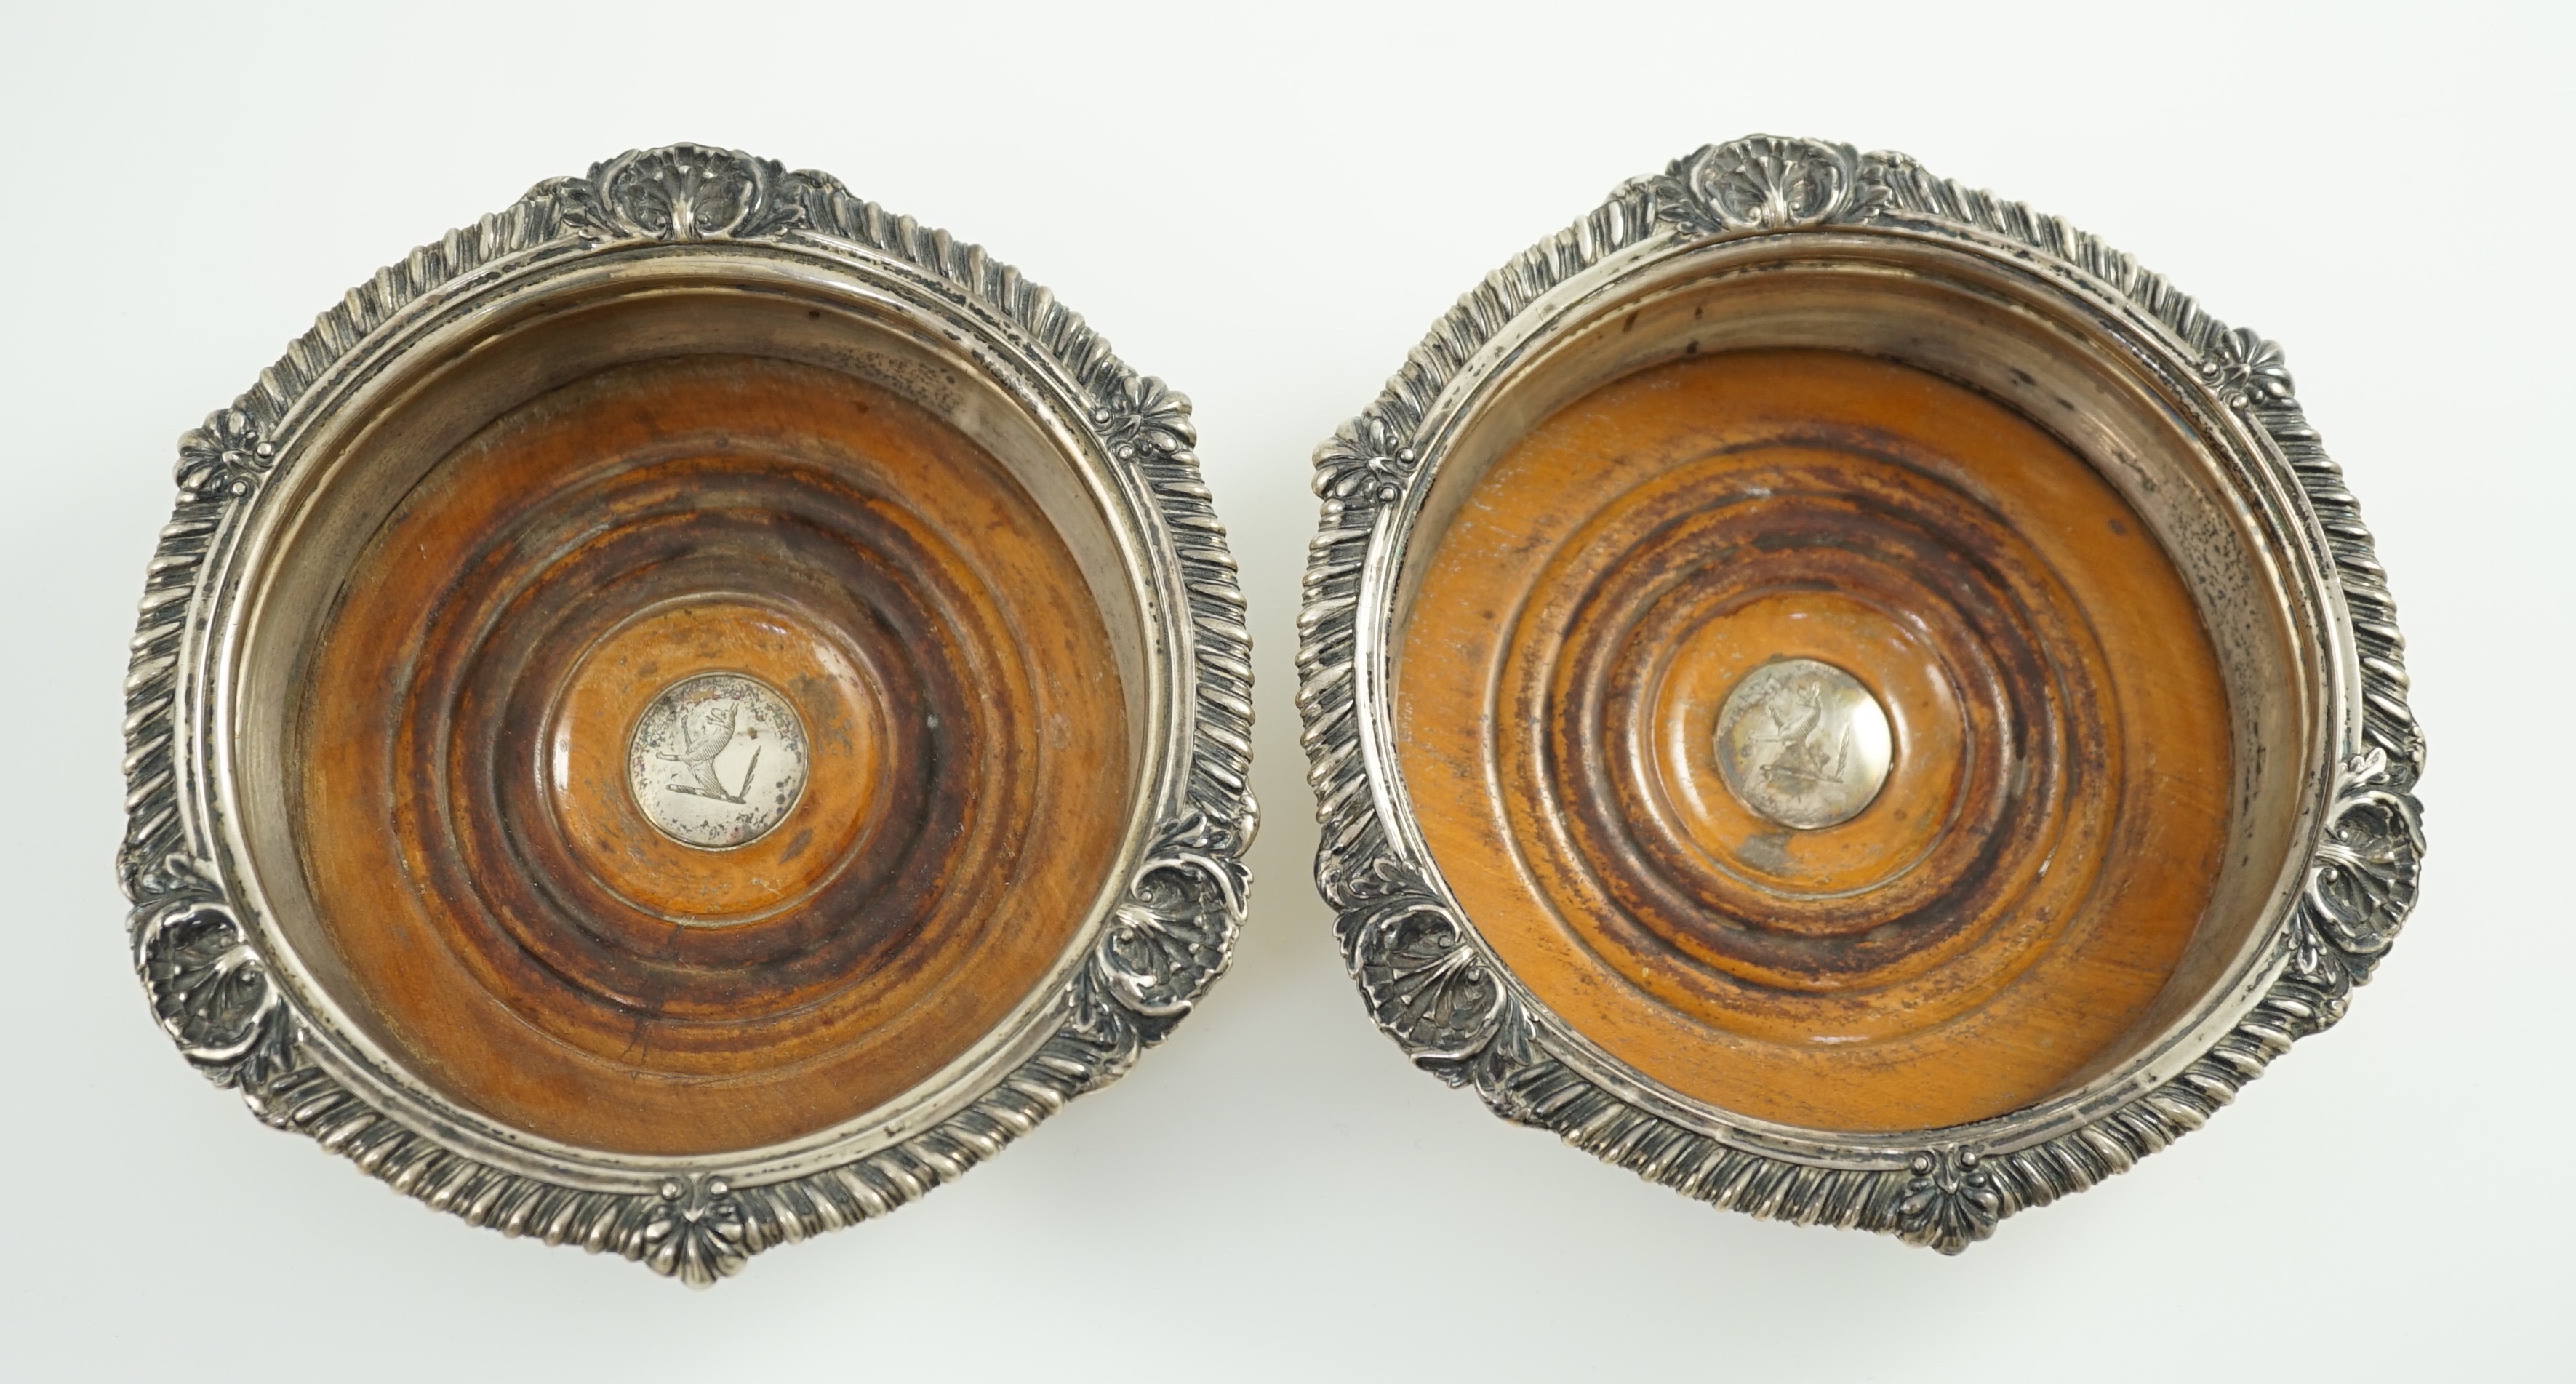 A pair of George IV silver mounted wine coasters by John Walton?